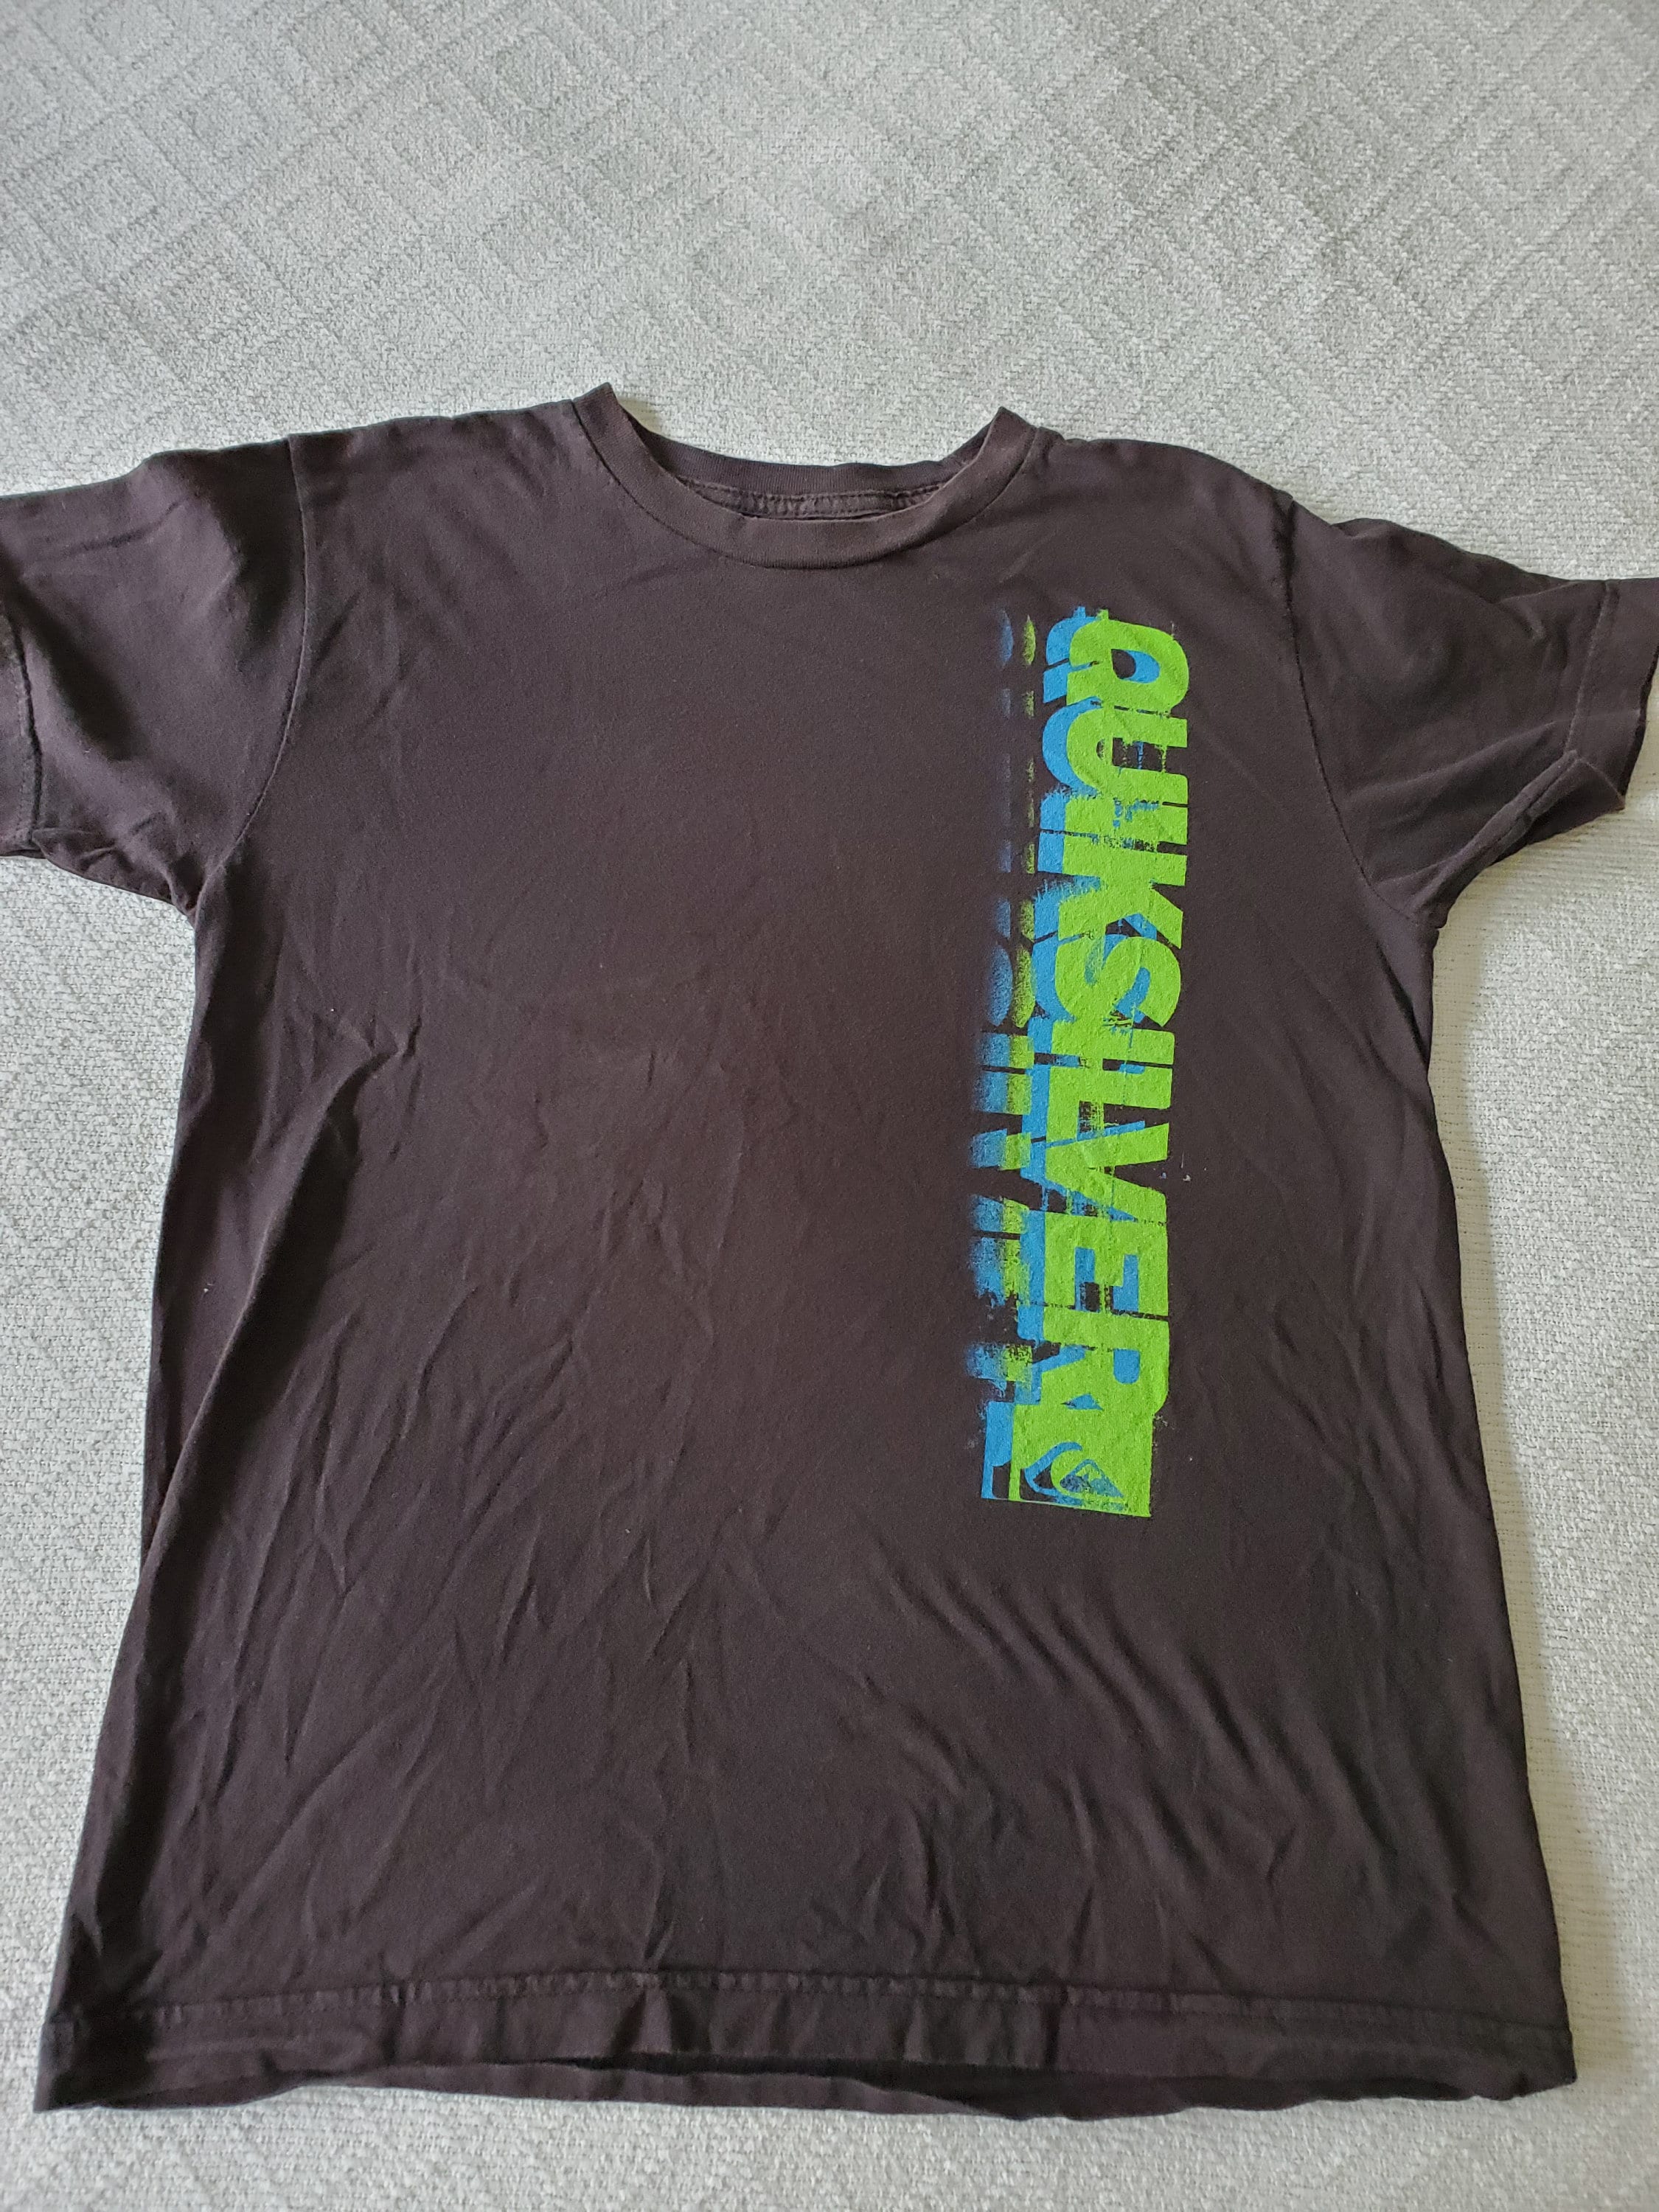 Unisex Kids' Size Large Vintage QUIKSILVER Black Tshirt with Lime Green and Electric Blue Vertical Logo Graphic on Front